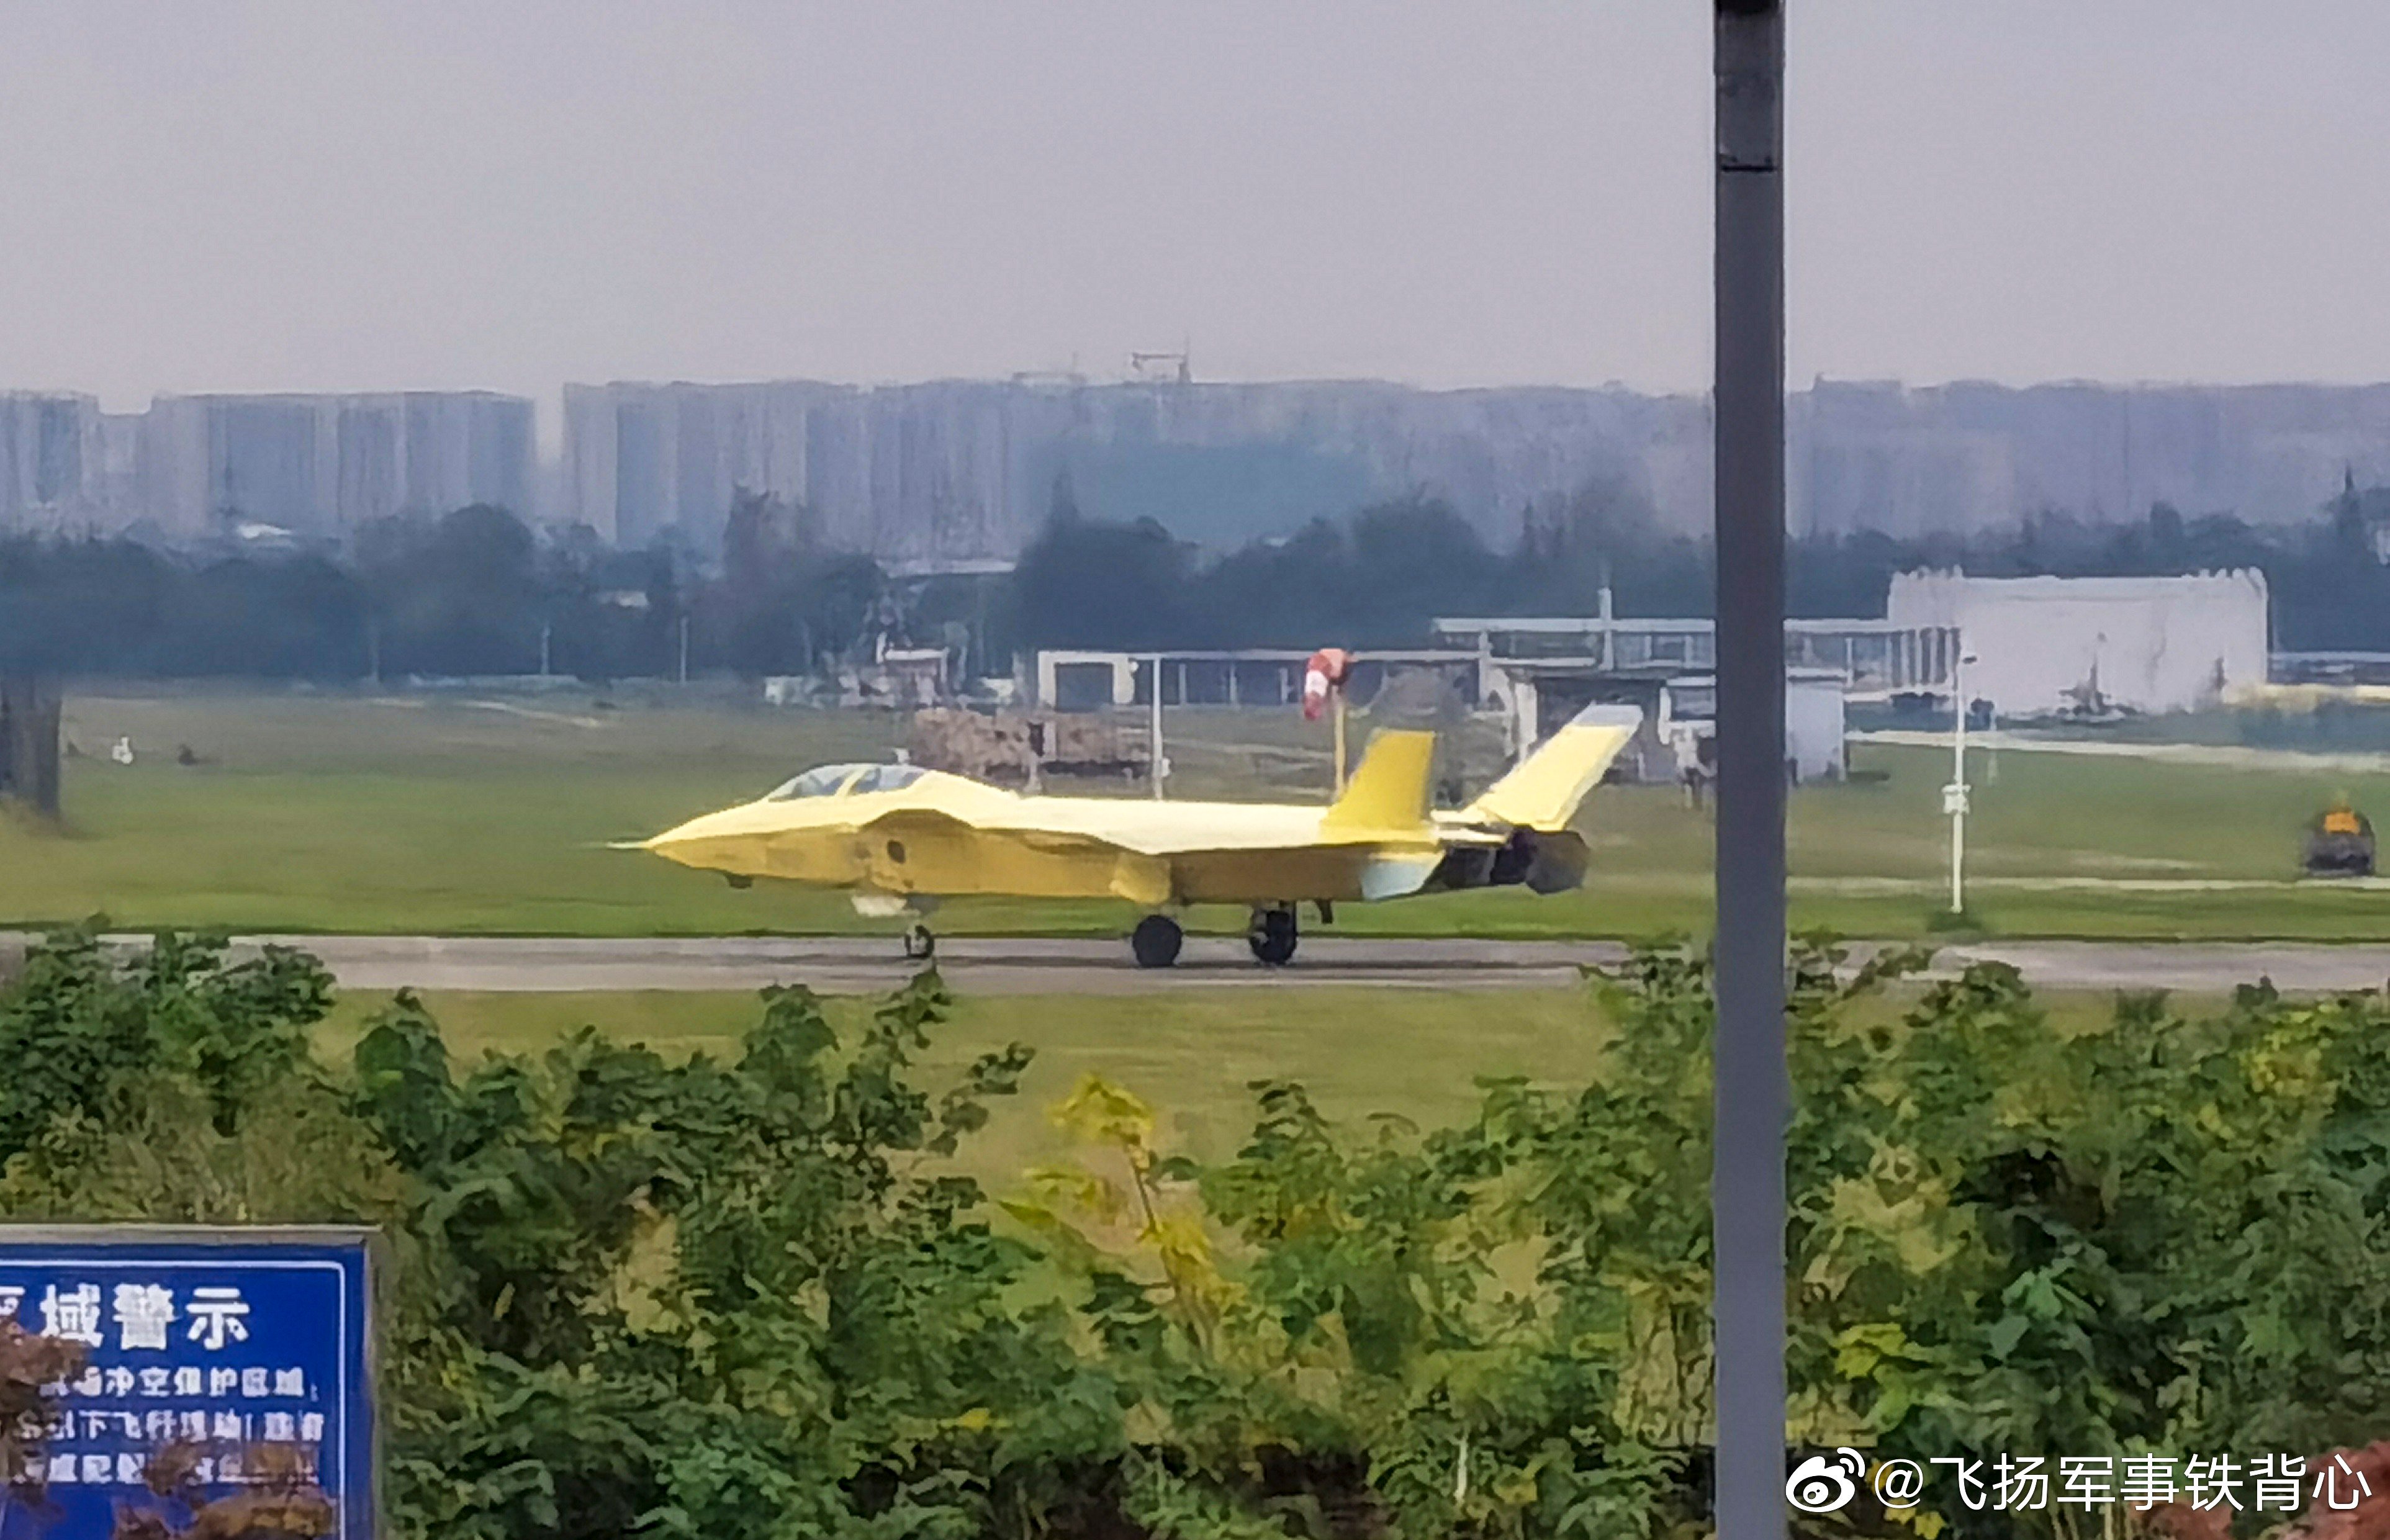 A prototype of the twin-seat J-20 was unveiled last October. Photo: Weibo
